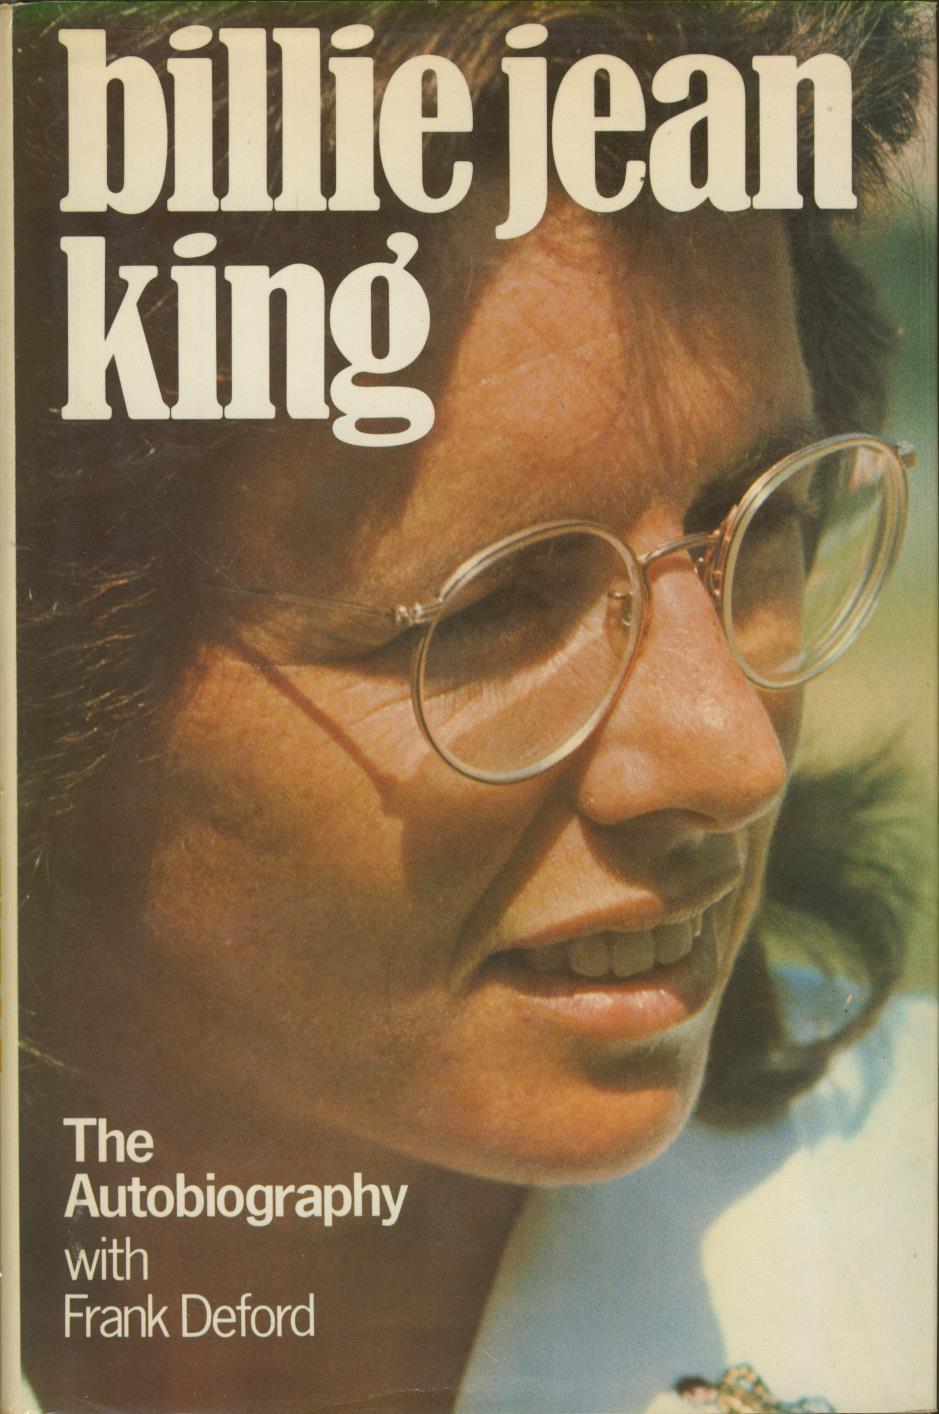 BILLIE JEAN KING: THE AUTOBIOGRAPHY - Billie Jean KING with Frank DEFORD